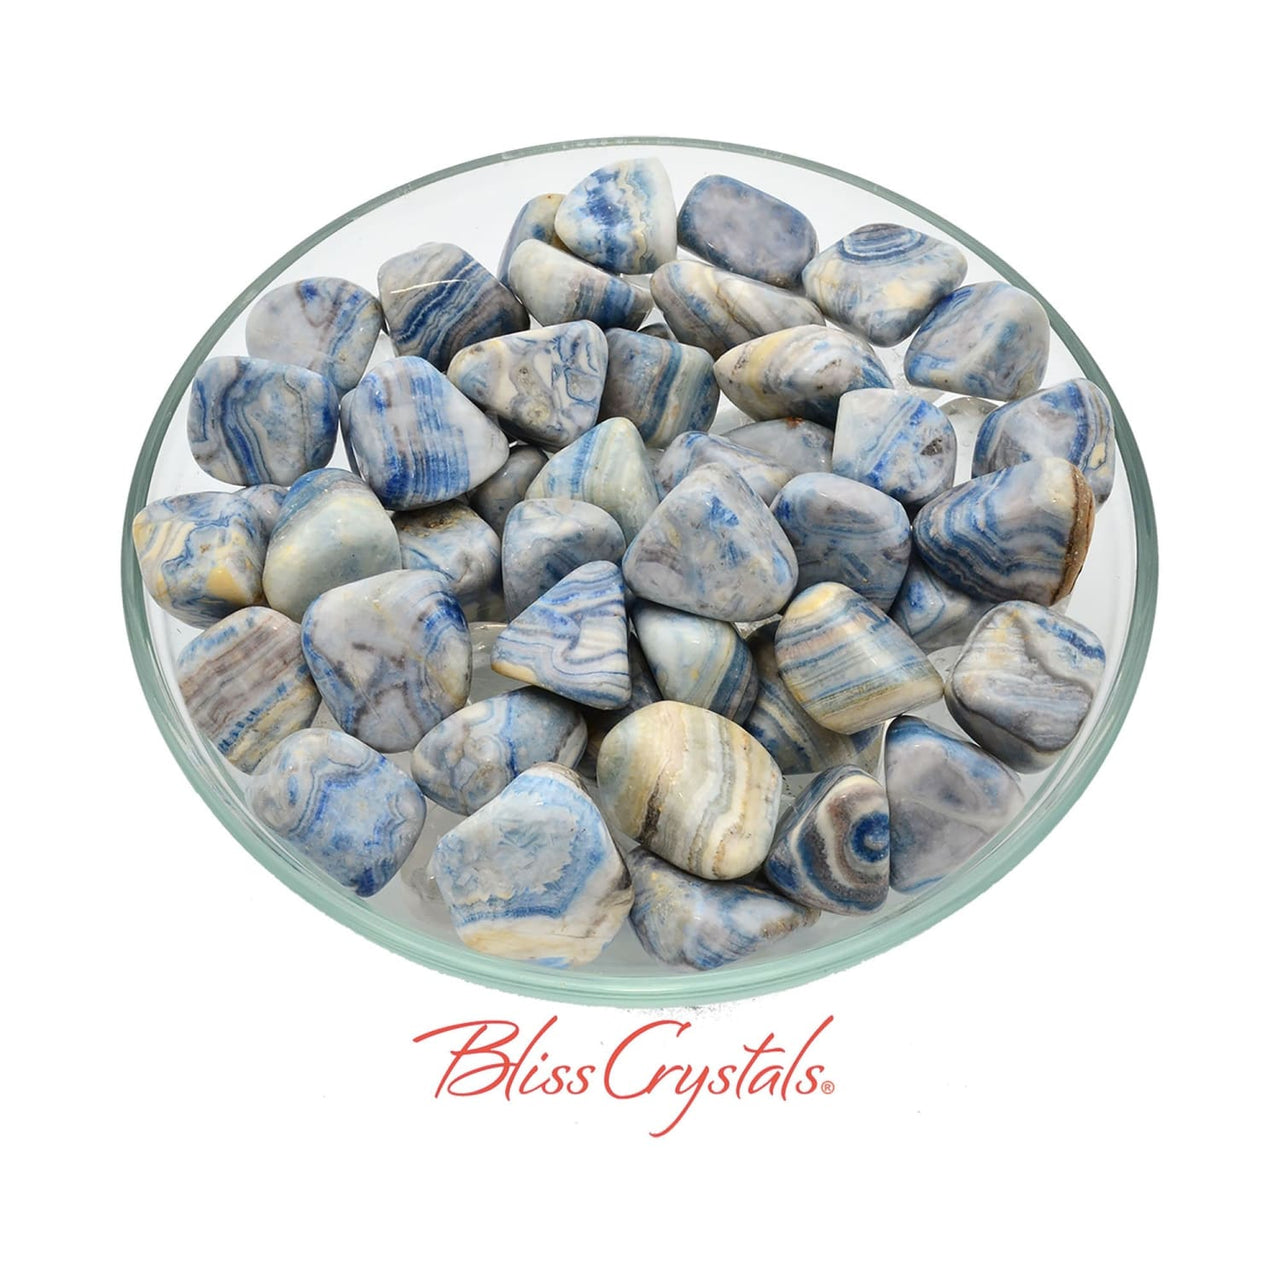 1 Blue SCHEELITE Tumbled Stone Healing Crystal and Stone for